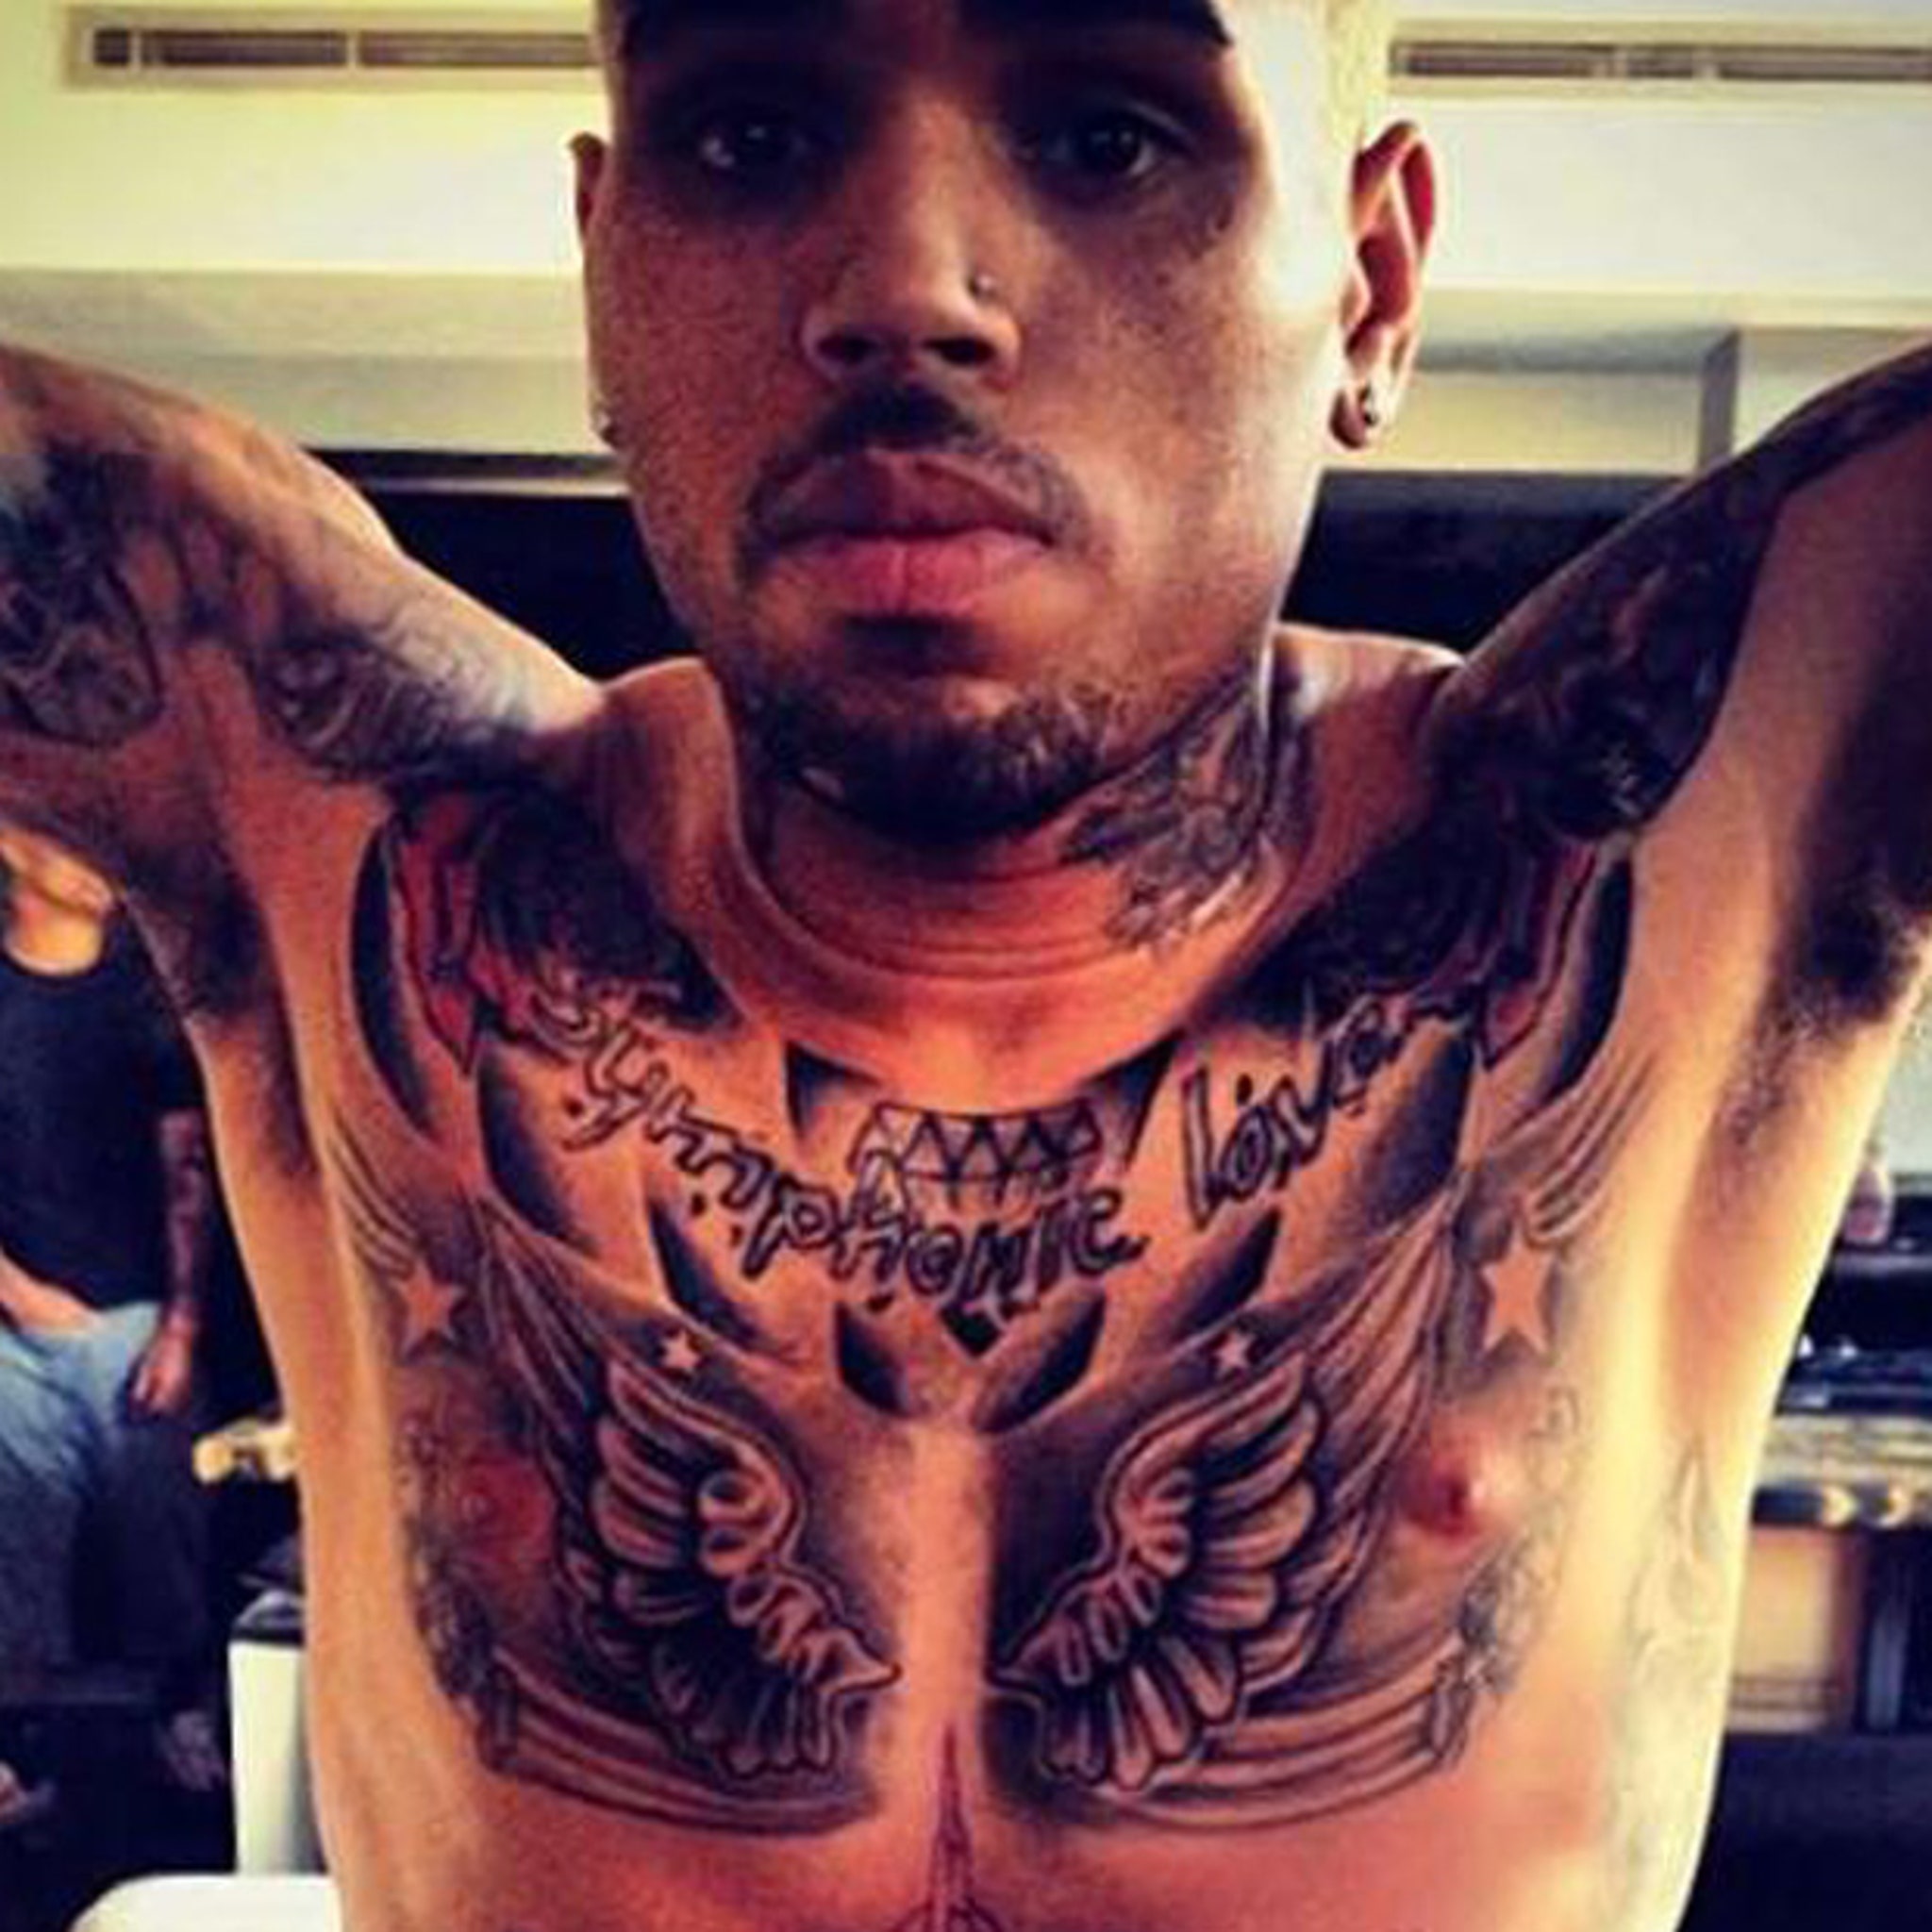 Chris Brown Shows Off New Face Tattoo